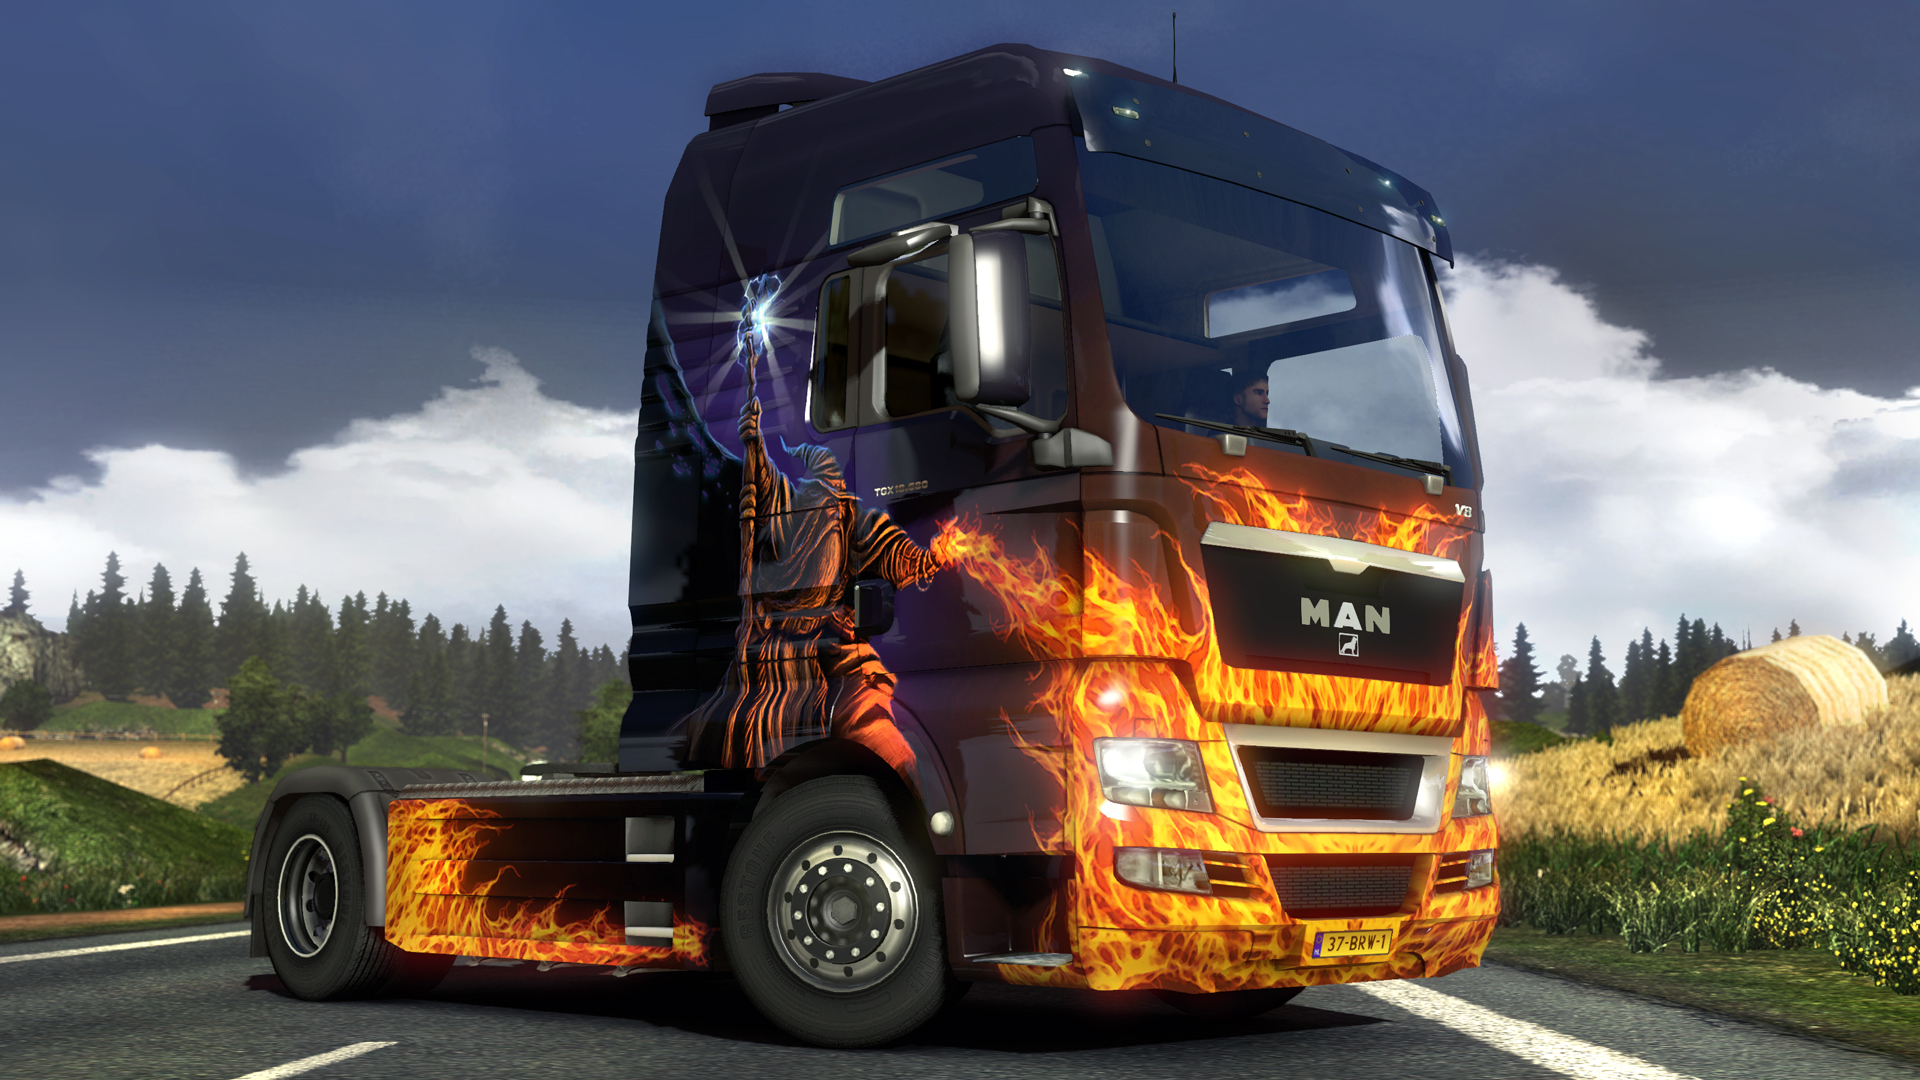 Truck Driver - DLC French Paint Jobs - Epic Games Store